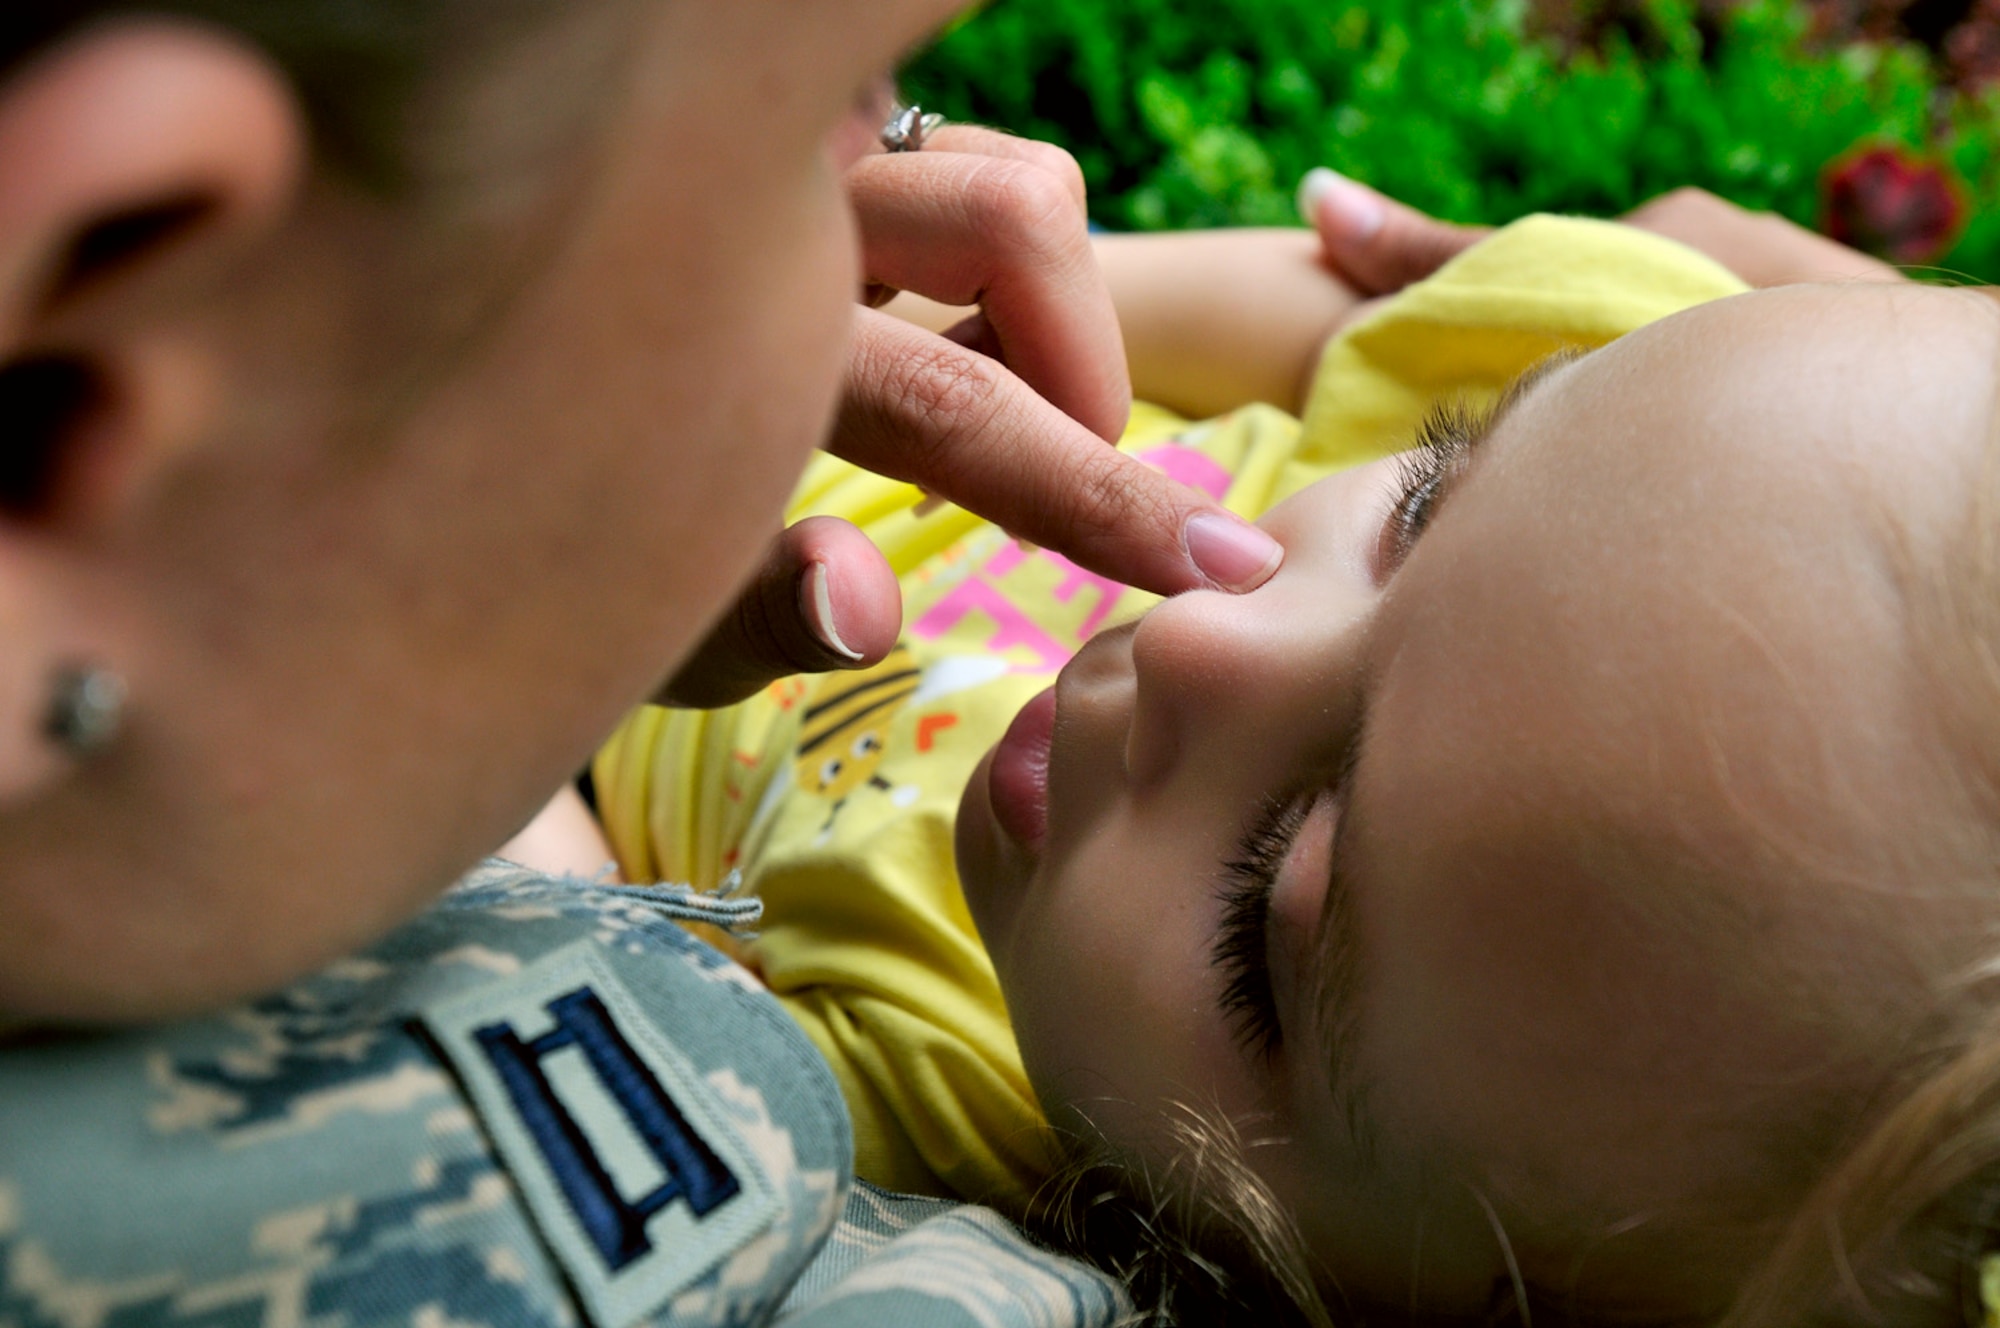 SCOTT AIR FORCE BASE, Ill. -- Capt. Kerri Rochman, 375th Mission Support Squadron chief of career development, spends some quiet time on the porch with her 3 1/2 year old daughter Elise on May 19. Elise was diagnosed more than two years ago with Tays-Sachs disease, an inherited incurable disease of the central nervous system. (U.S. Air Force photo/Master Sgt. Maurice Hessel)